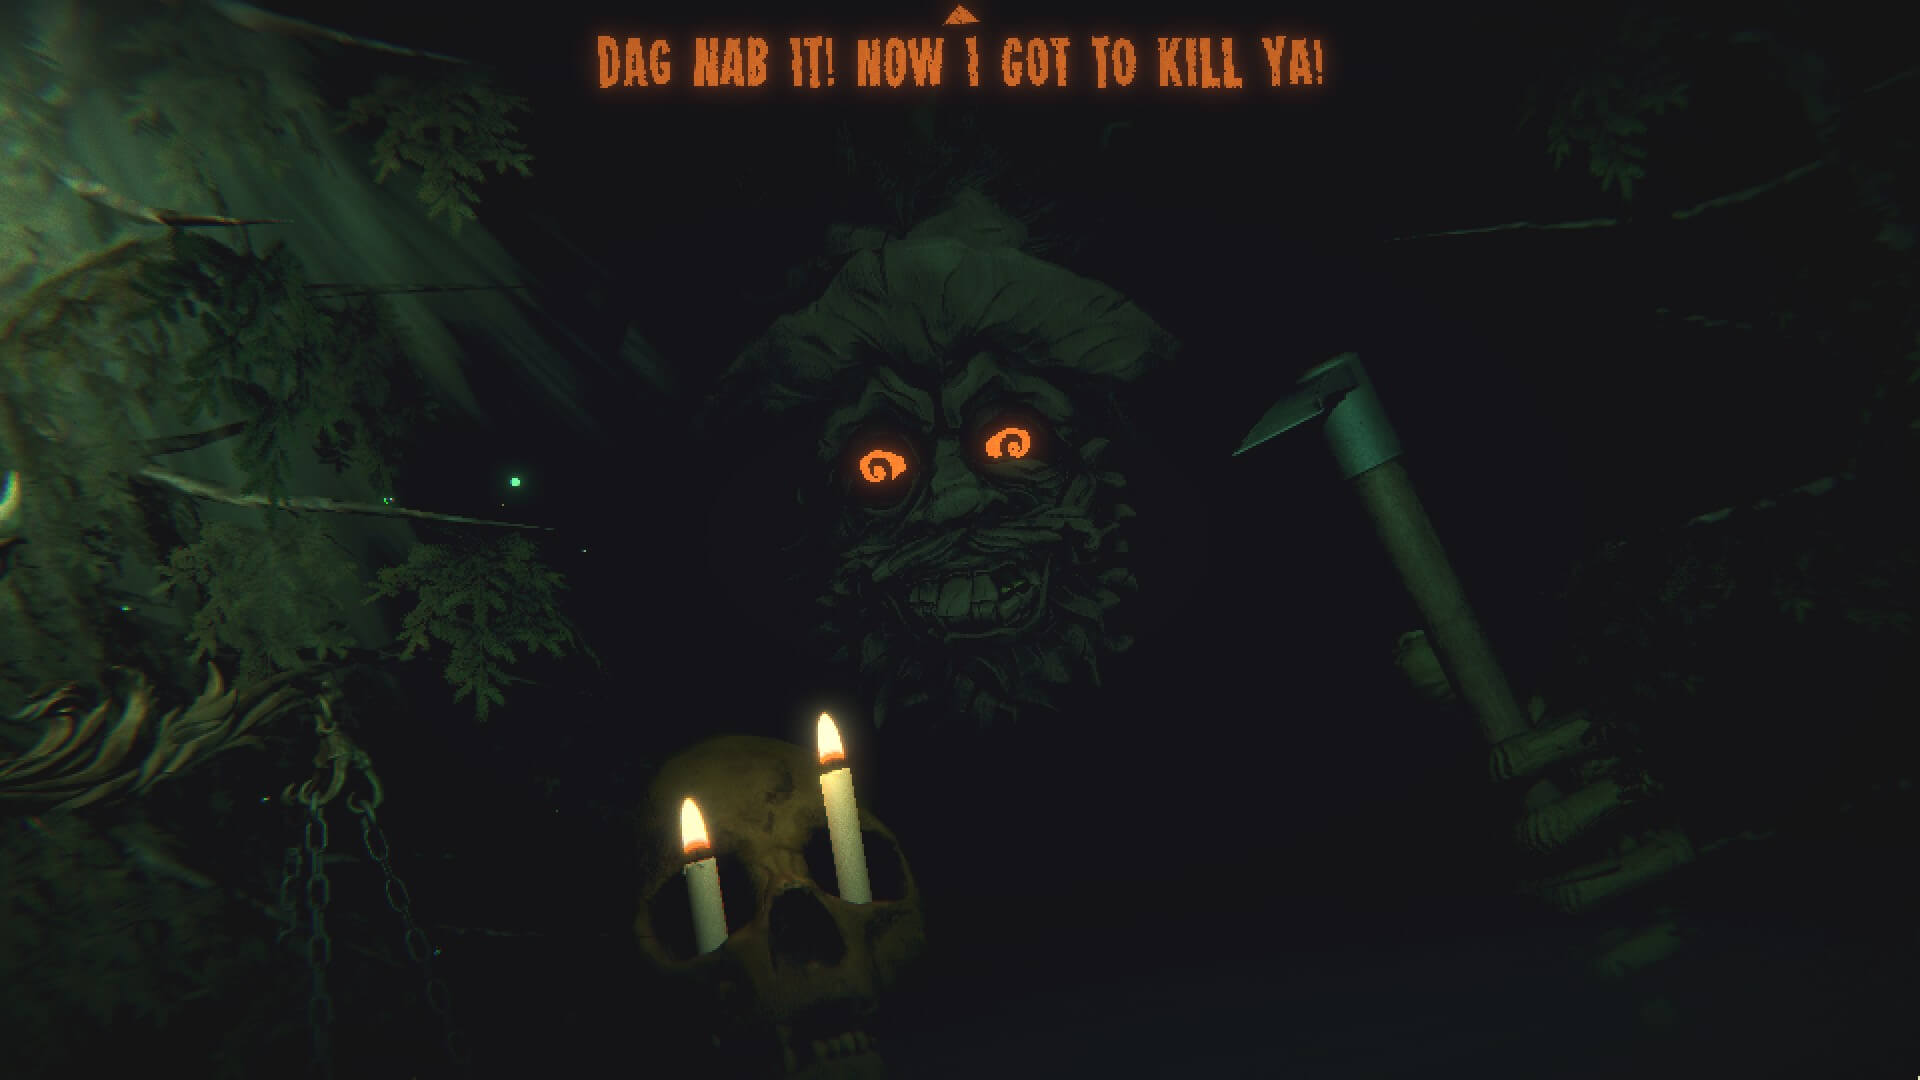 A man in a mask looking at the player with orange swirling eyes in a dark blue room with an eerie feeling to it.